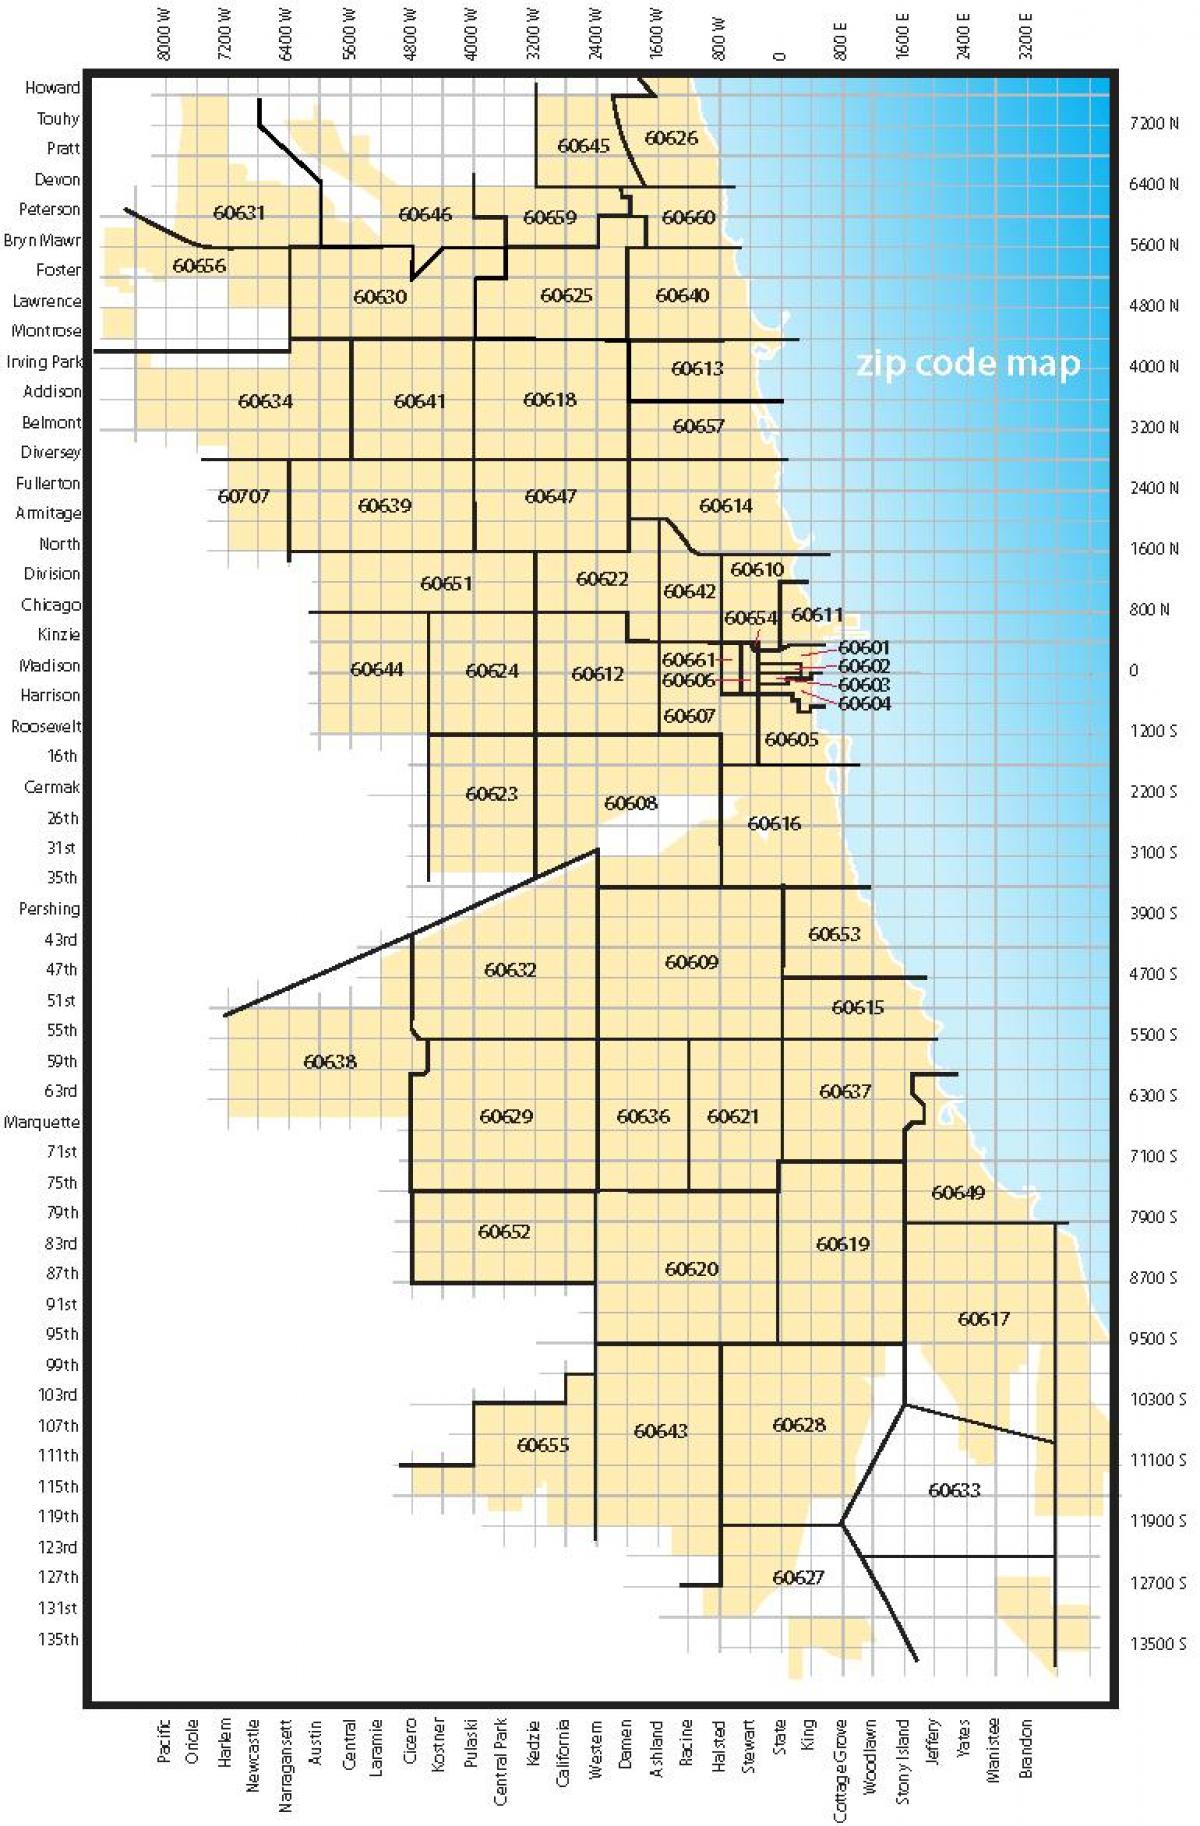 Chicago area code map